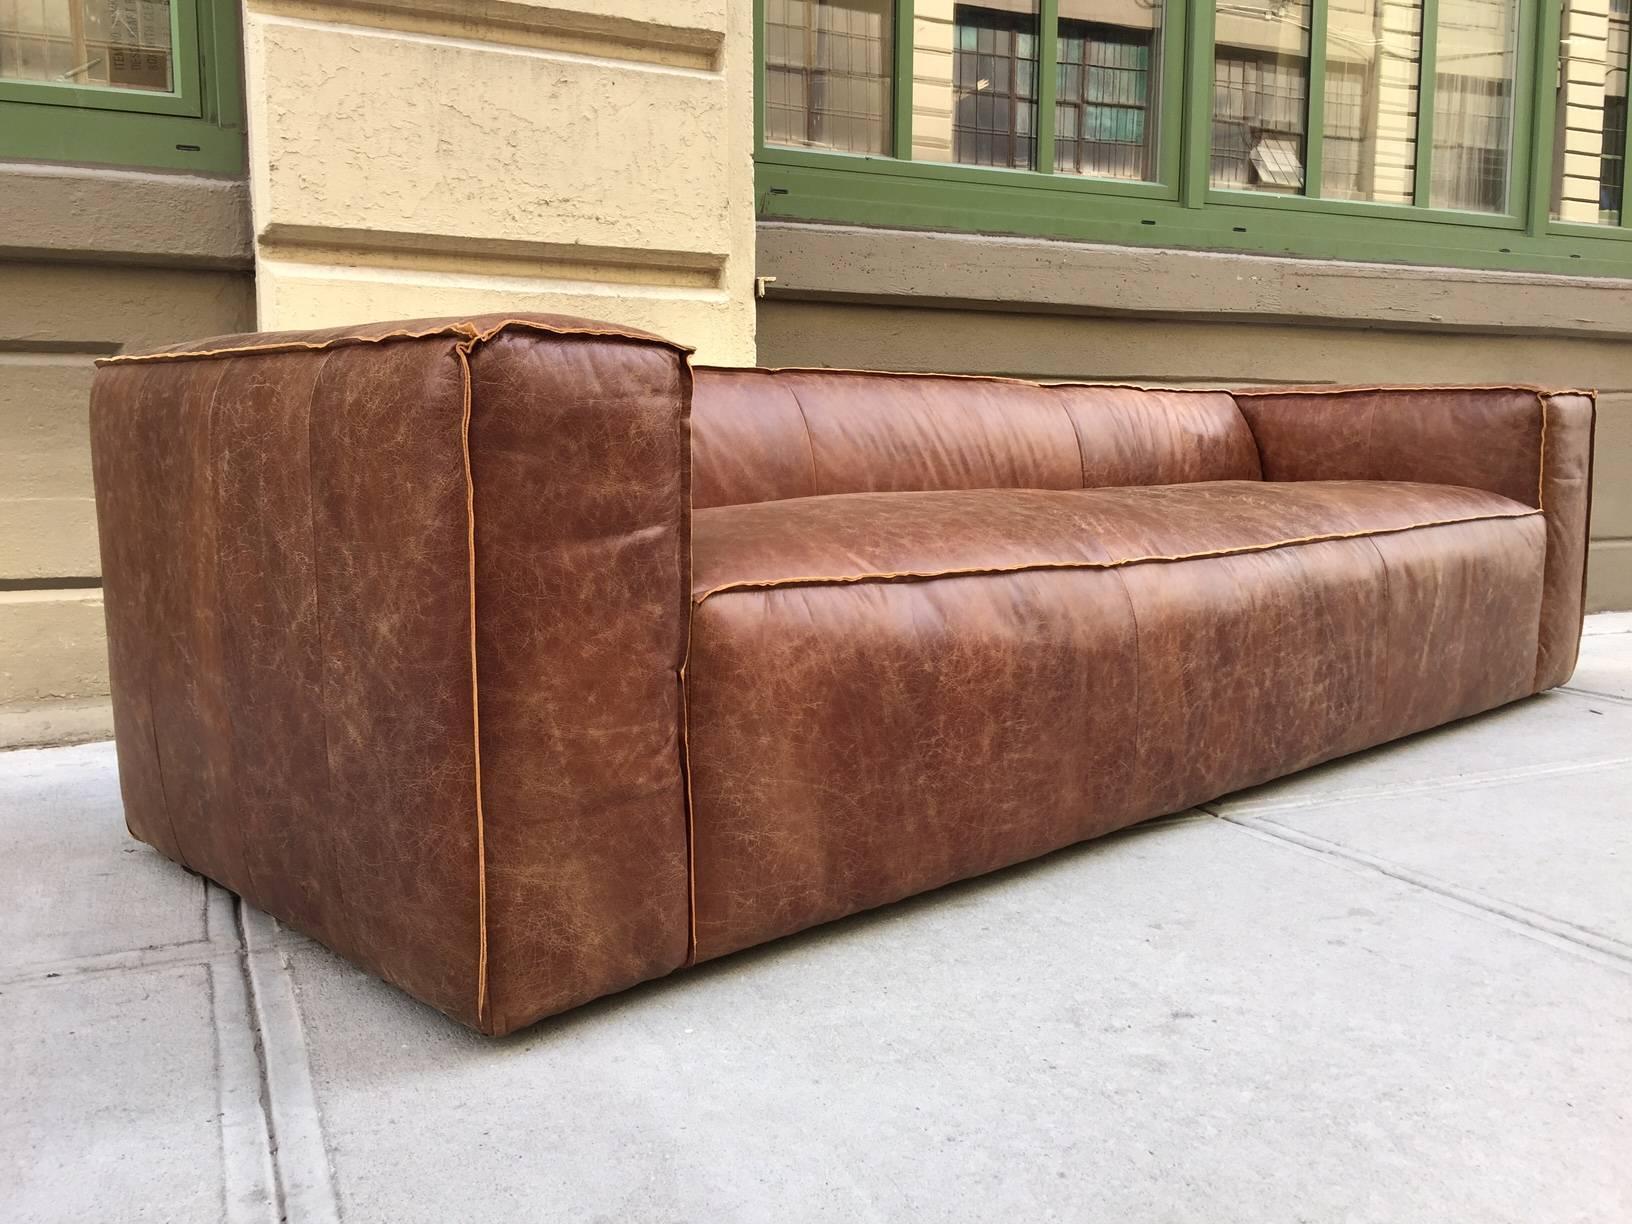 9 feet contemporary distressed brown leather sofa with Cerused oak feet.